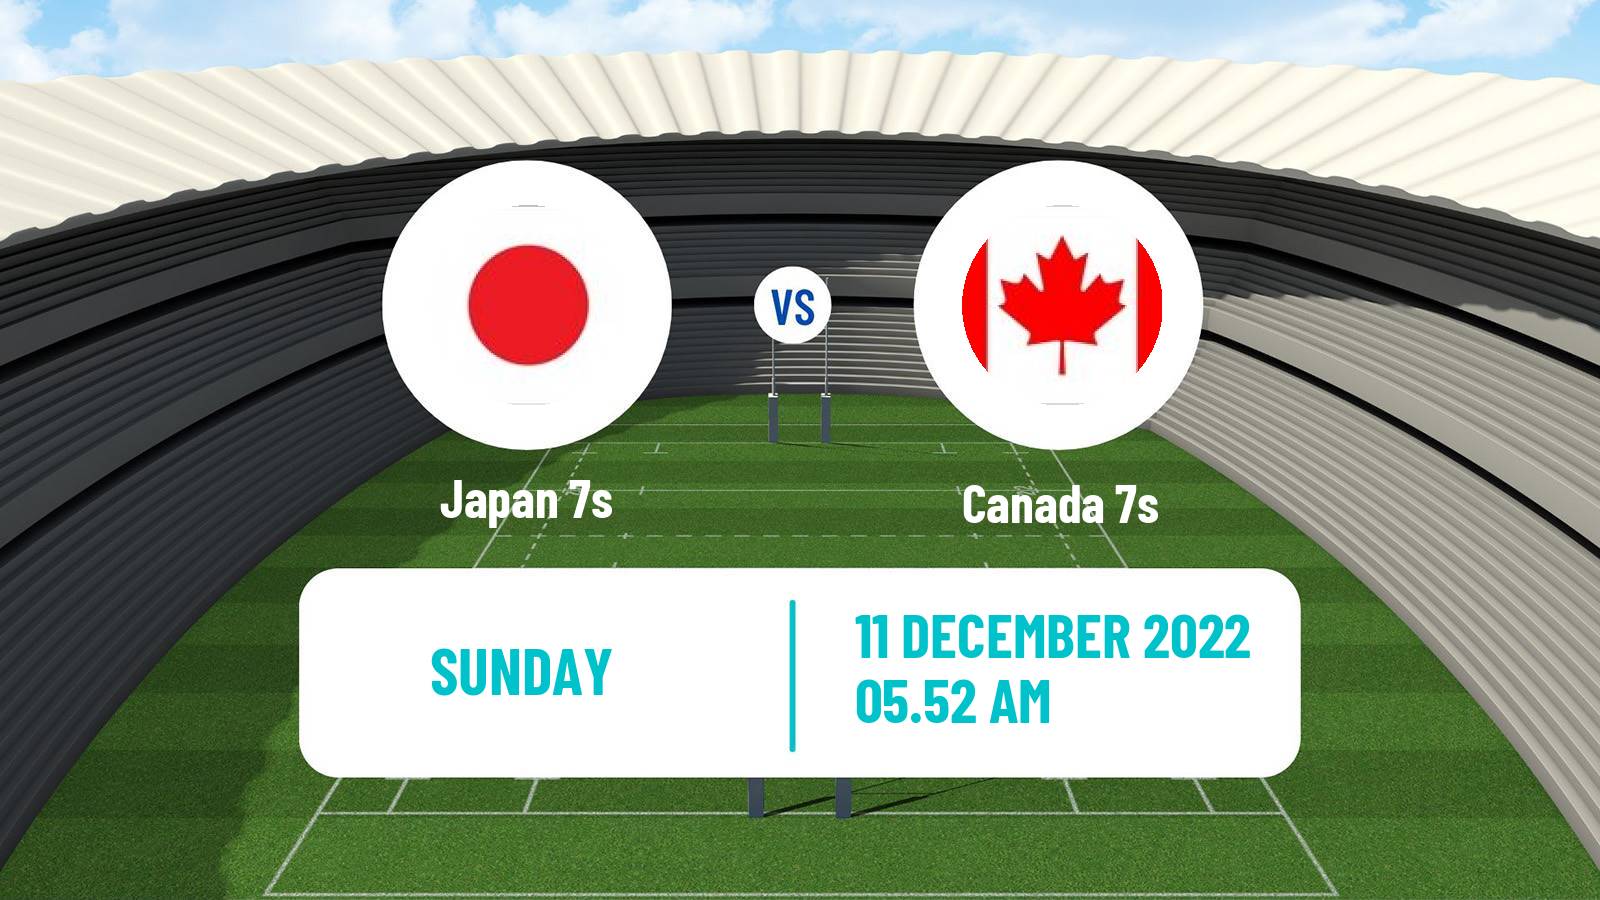 Rugby union Sevens World Series - South Africa Japan 7s - Canada 7s